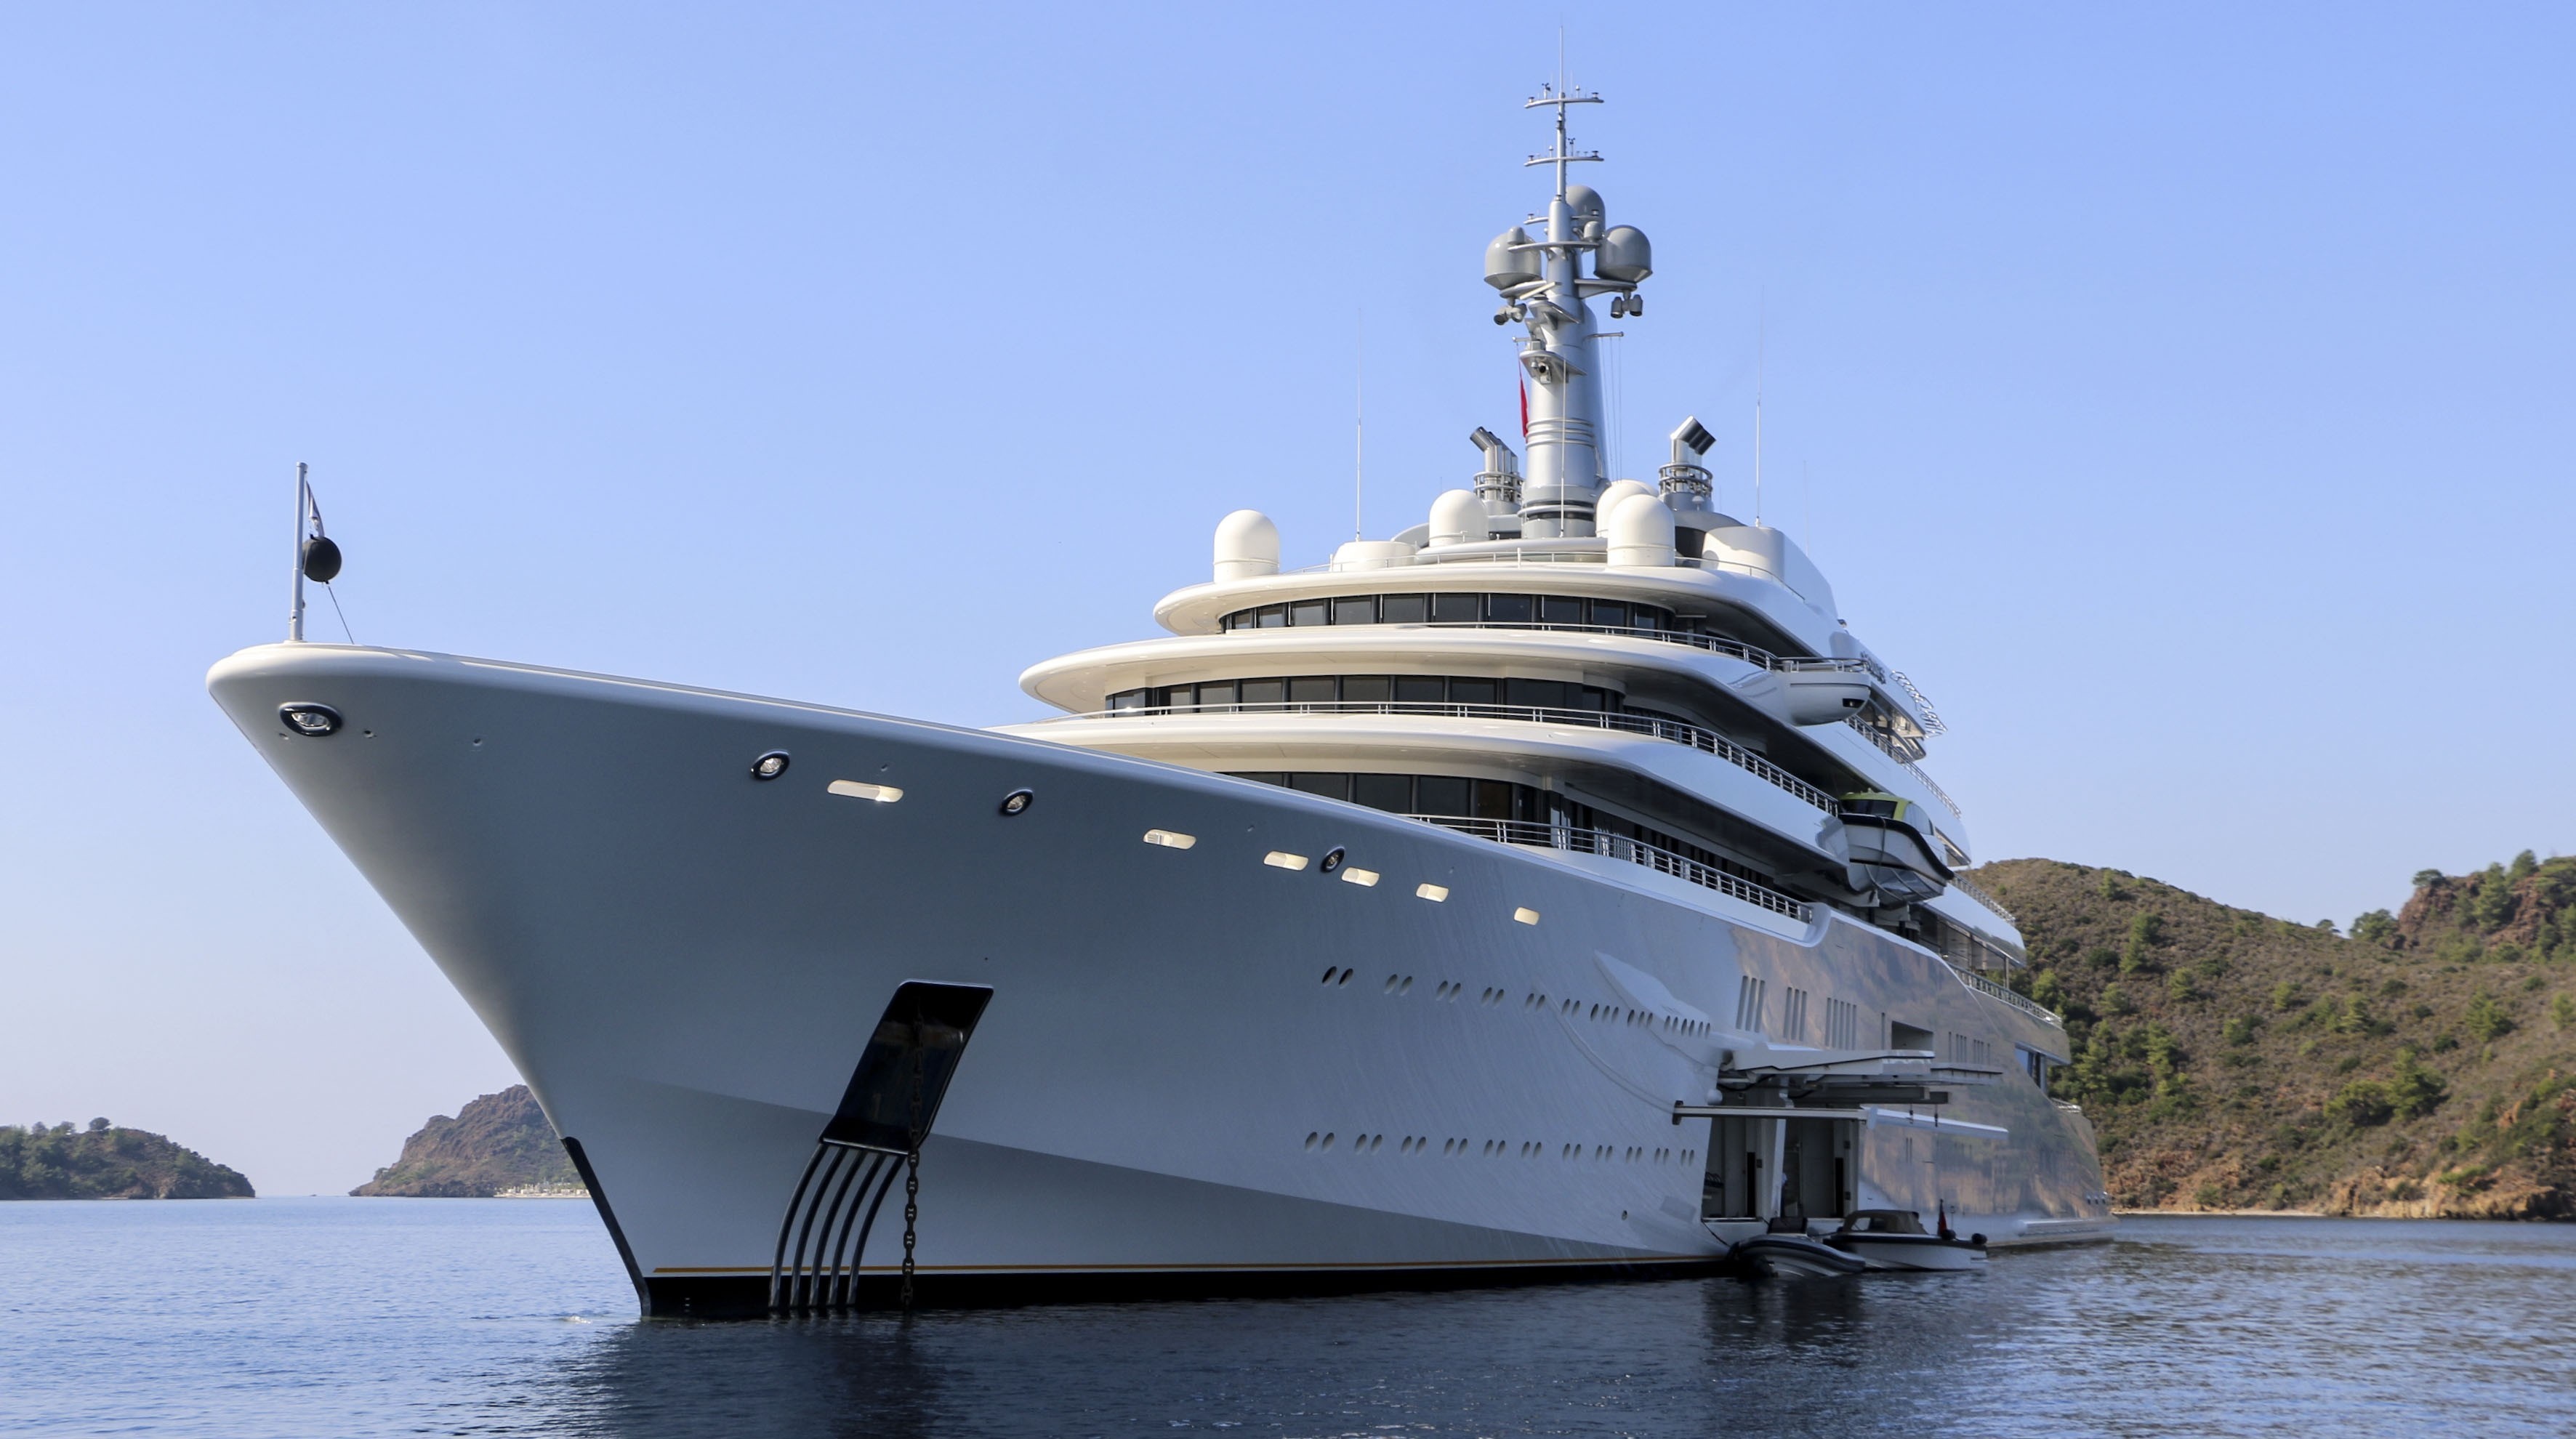 Eclipse, the private luxury yacht of Russian billionaire Roman Abramovich, anchors at Hisaronu Bay in Marmaris district of Mugla, southwestern Turkey on October 19, 2015. The 163-meter-long Eclipse, world's second largest private yacht, has two helicopter pads, 24 guest cabins, two swimming pools, a disco hall, a movie theater and two mini-submarines. (Anadolu Agency&mdash;Getty Images)